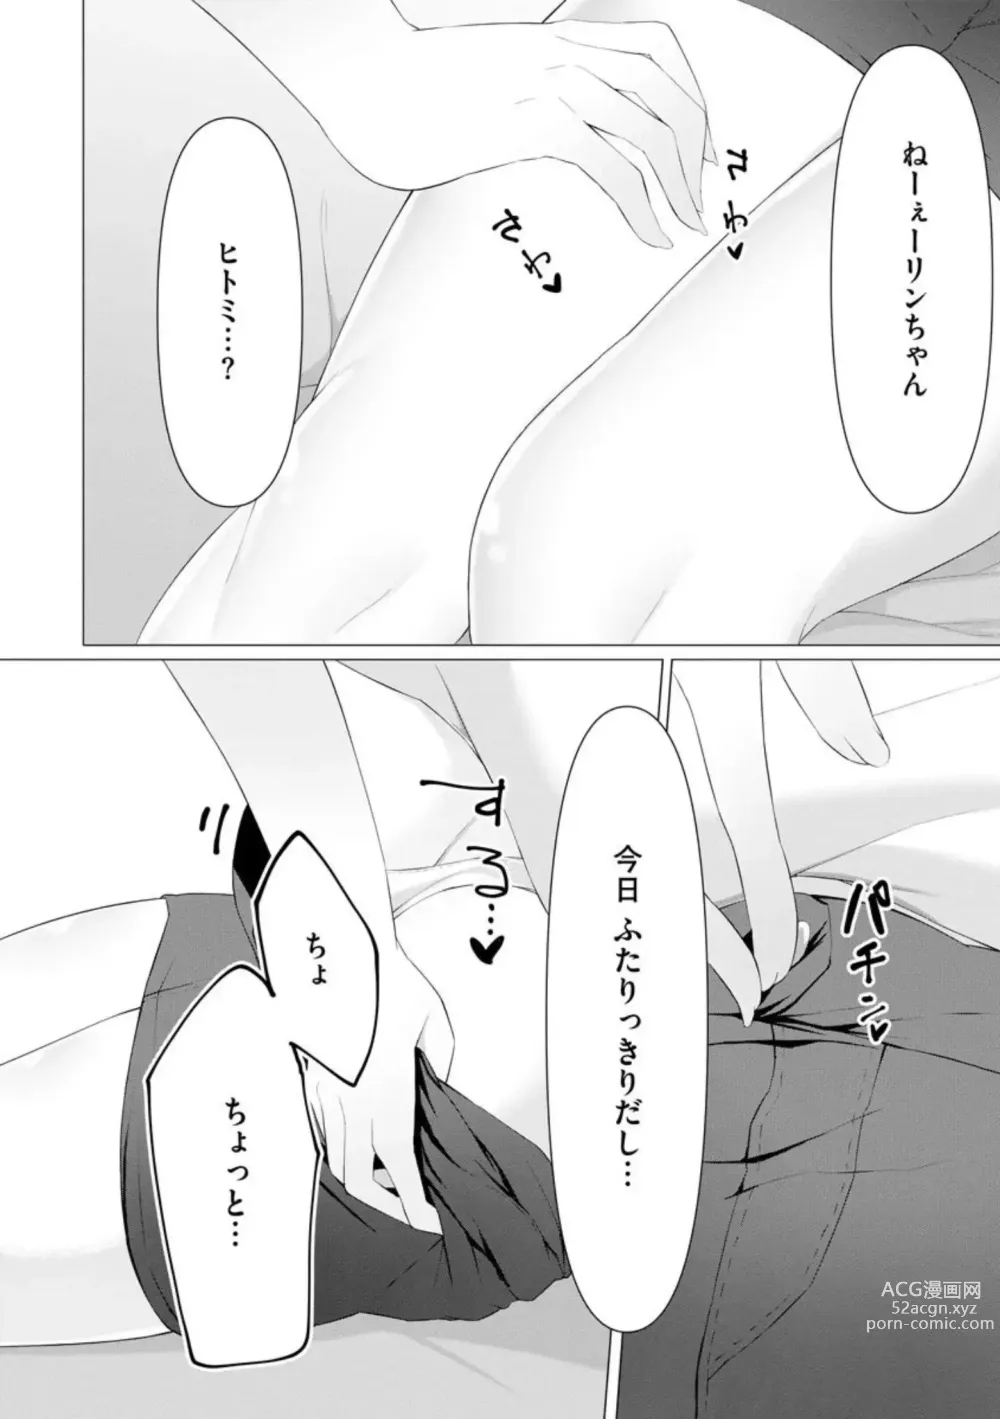 Page 5 of doujinshi Foot Trap Ch. 5